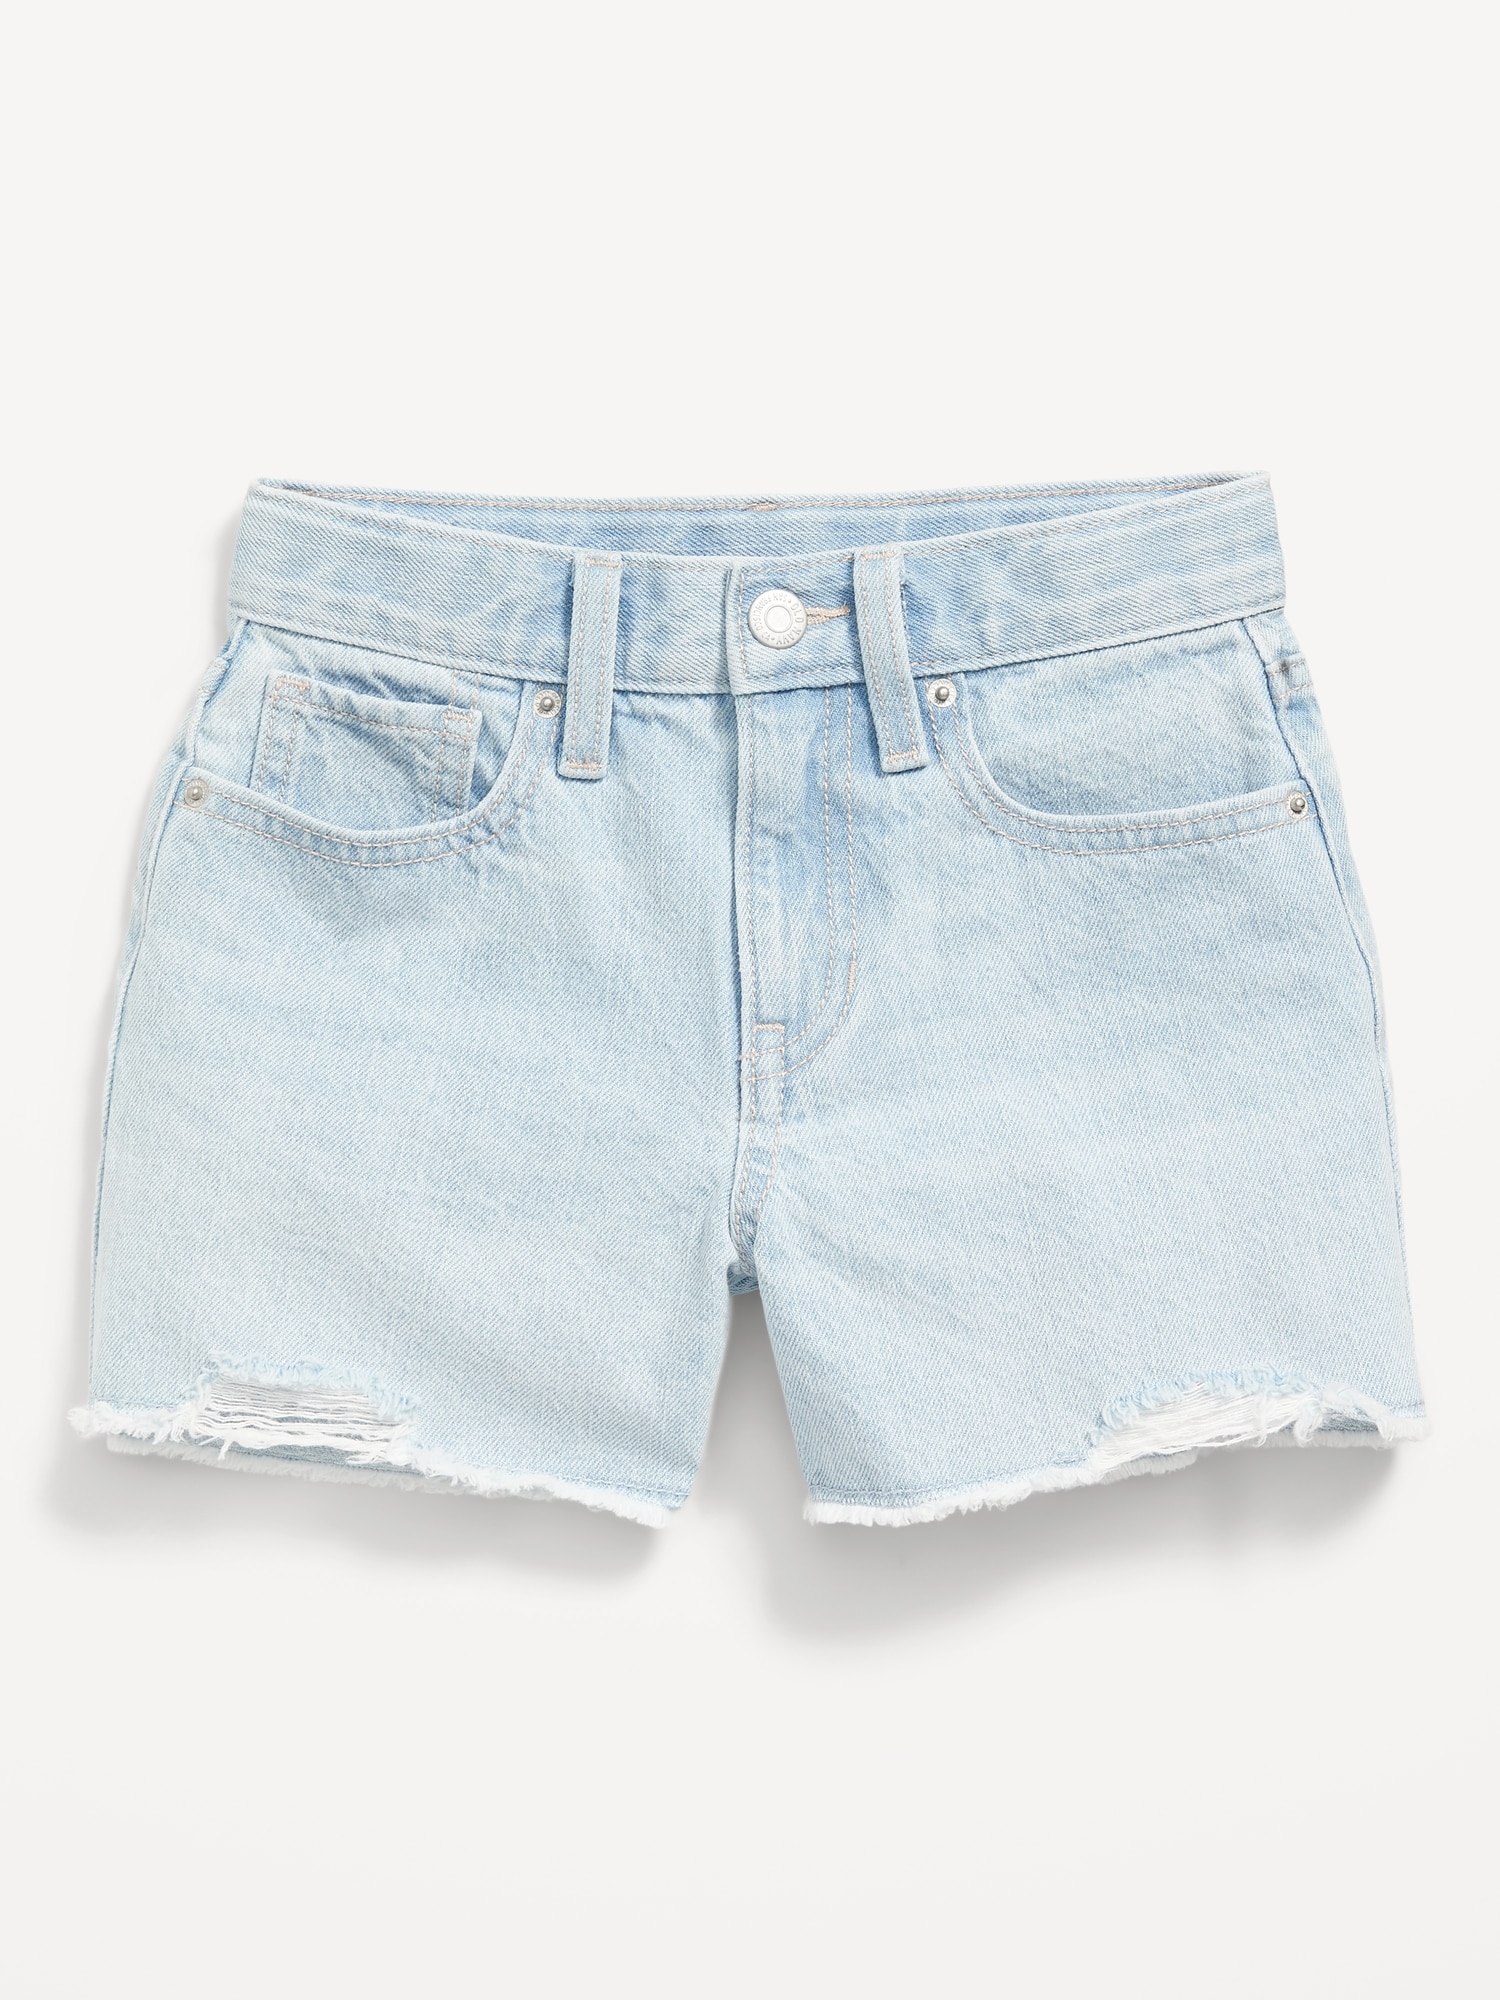 High-Waisted Light-Wash Cut-Off Jean Shorts for Girls